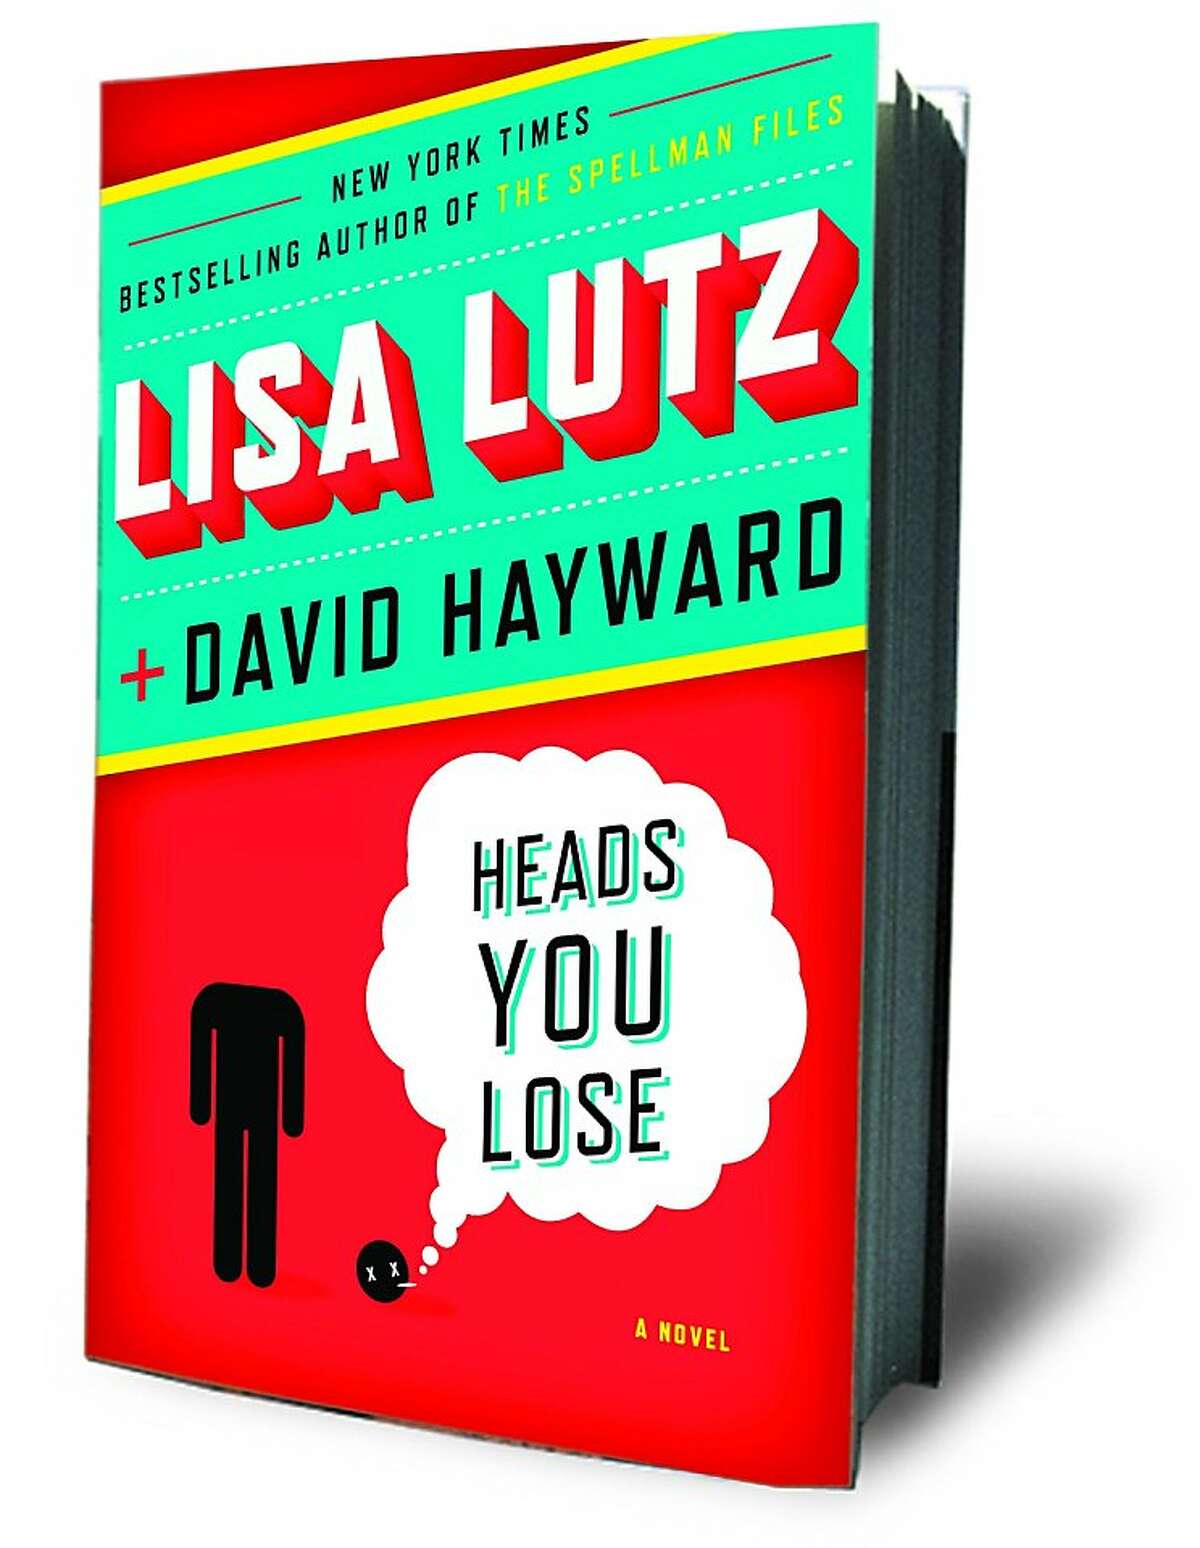 Cover of Lisa Lutz and David Hayward's new book.